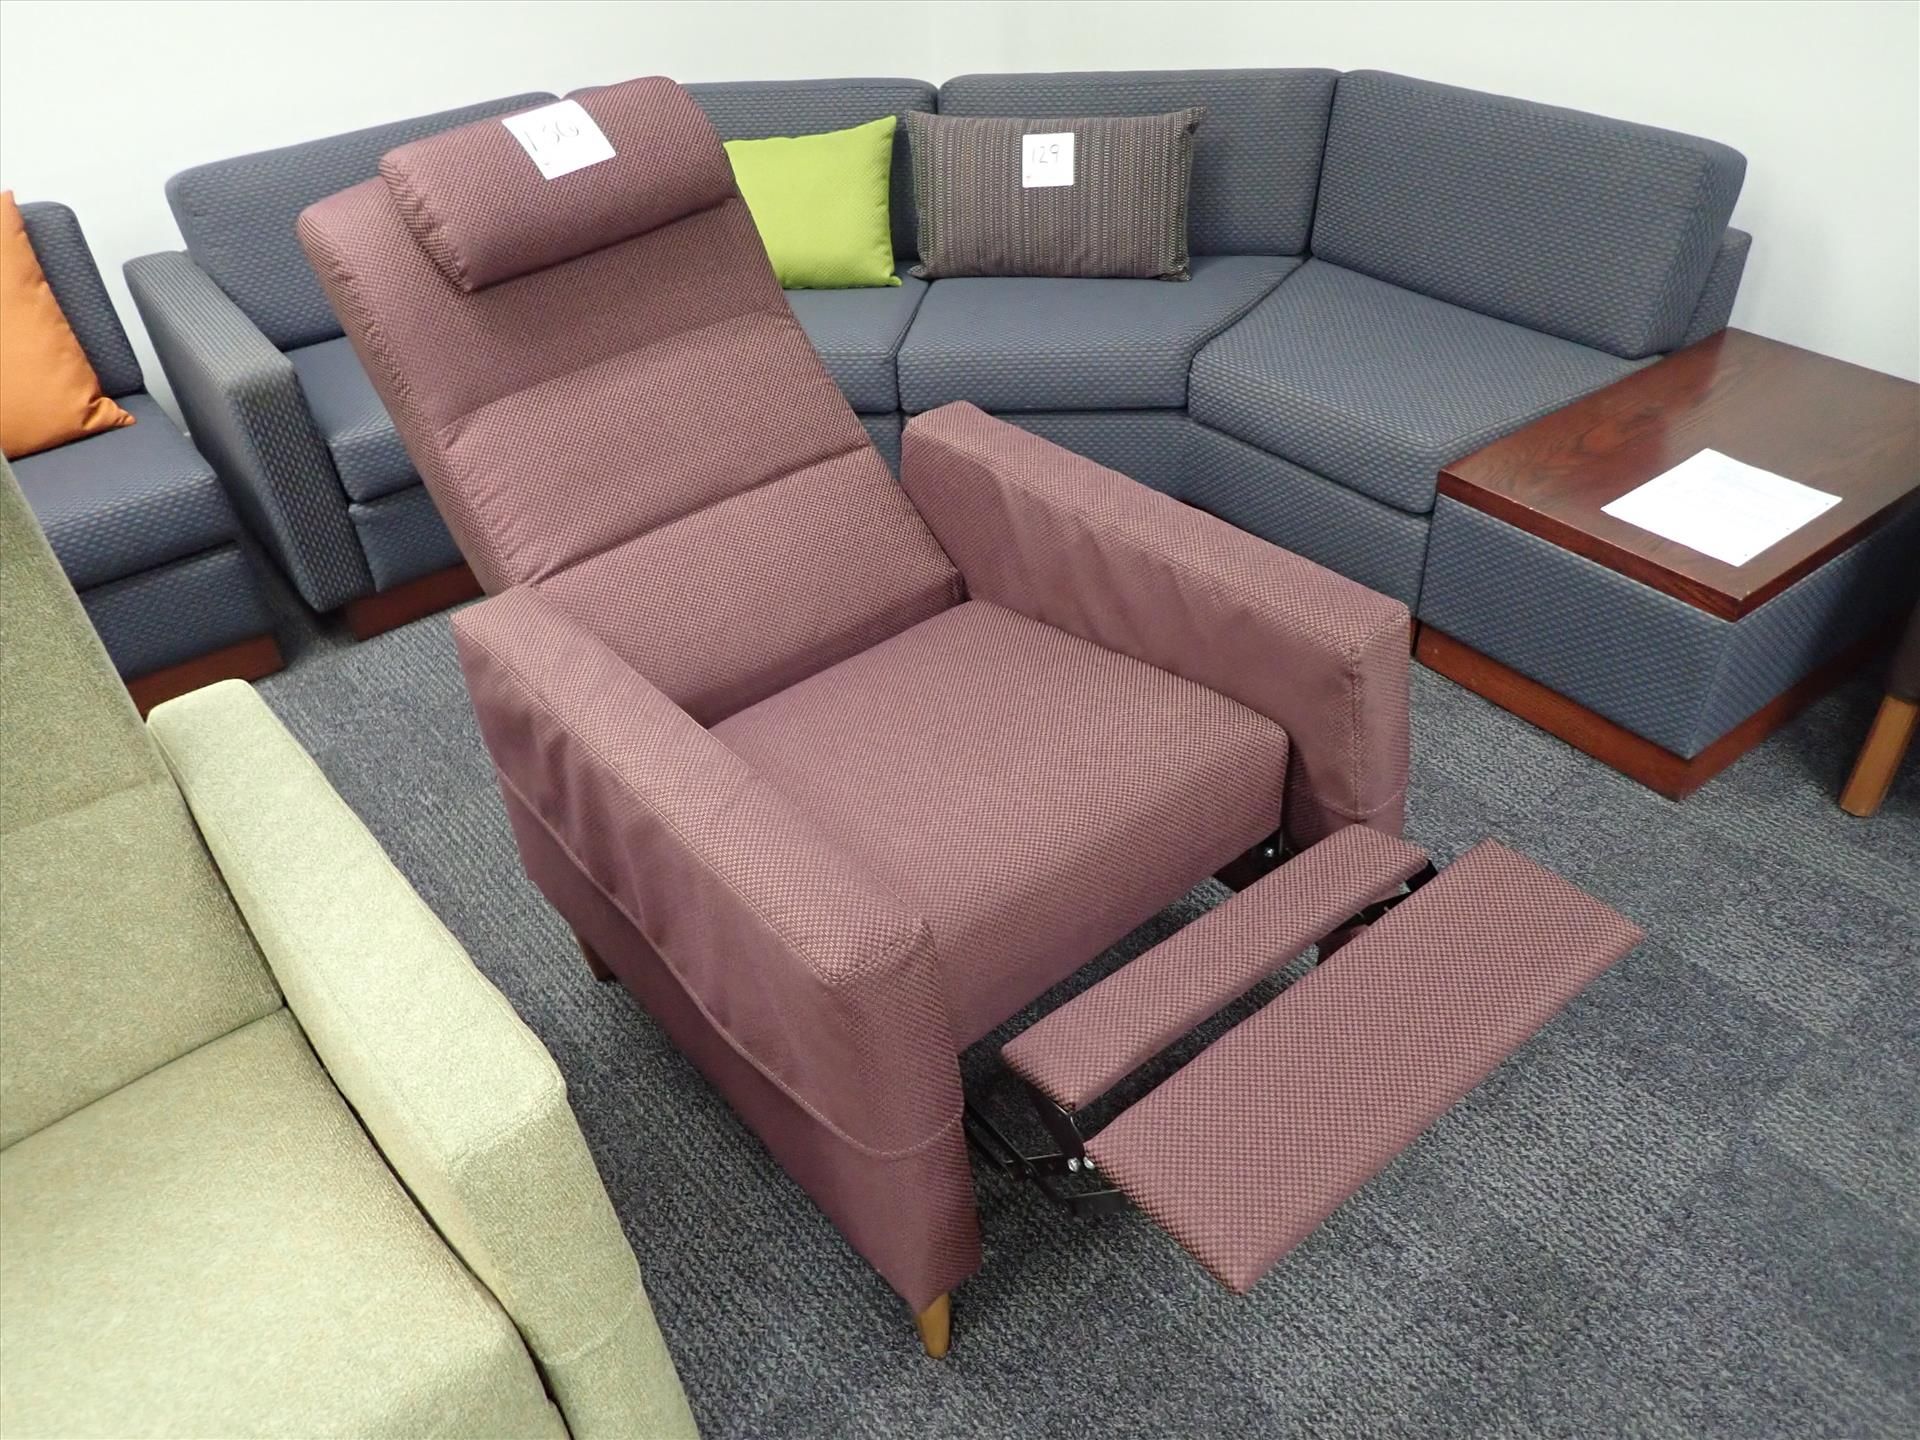 Baret push-back recliner w/ weighted headrest, arm-covers, stain-resistant commercial-grade fabrics - Image 2 of 2